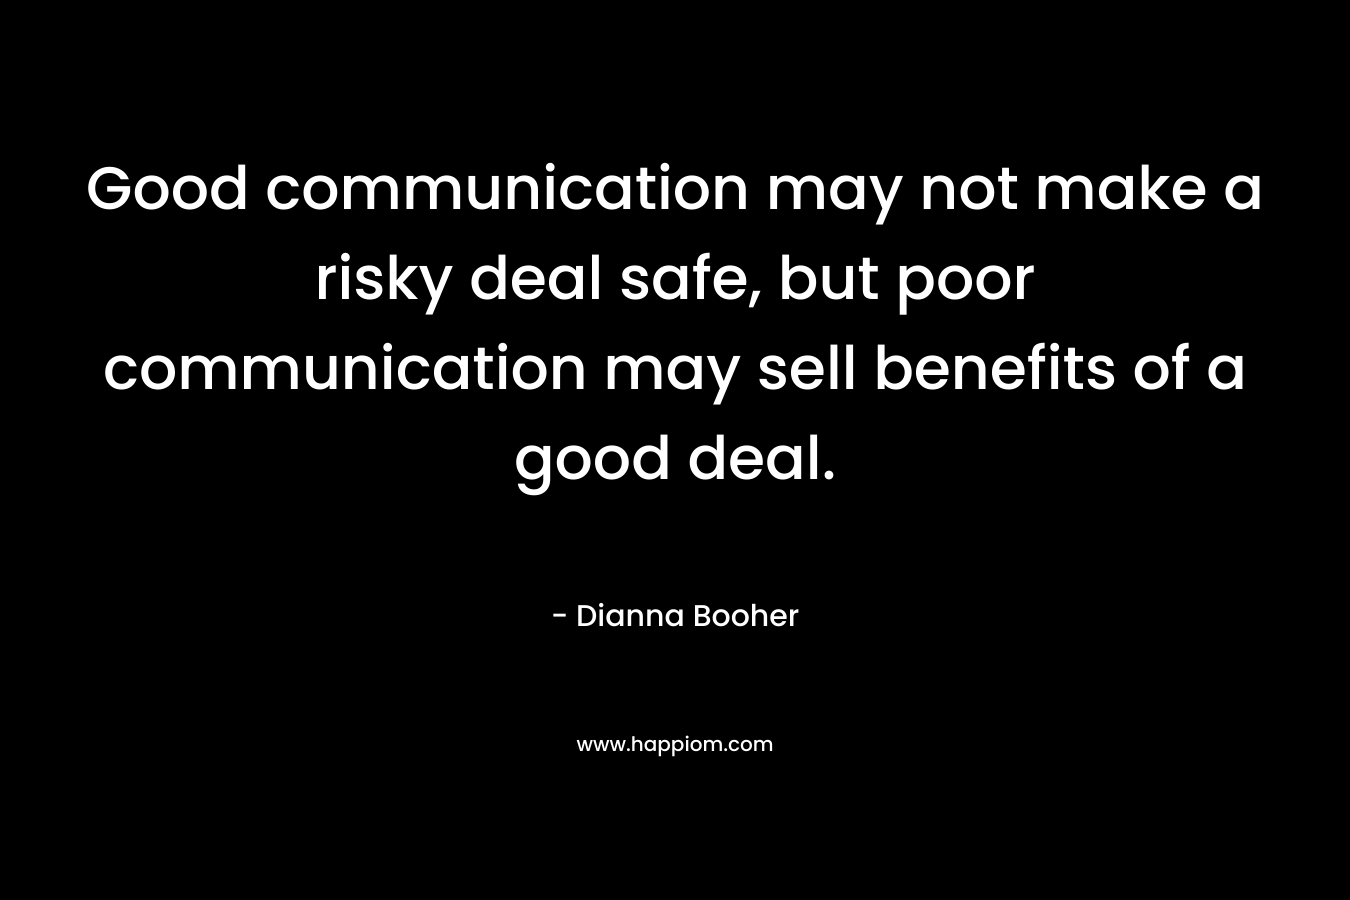 Good communication may not make a risky deal safe, but poor communication may sell benefits of a good deal. – Dianna Booher